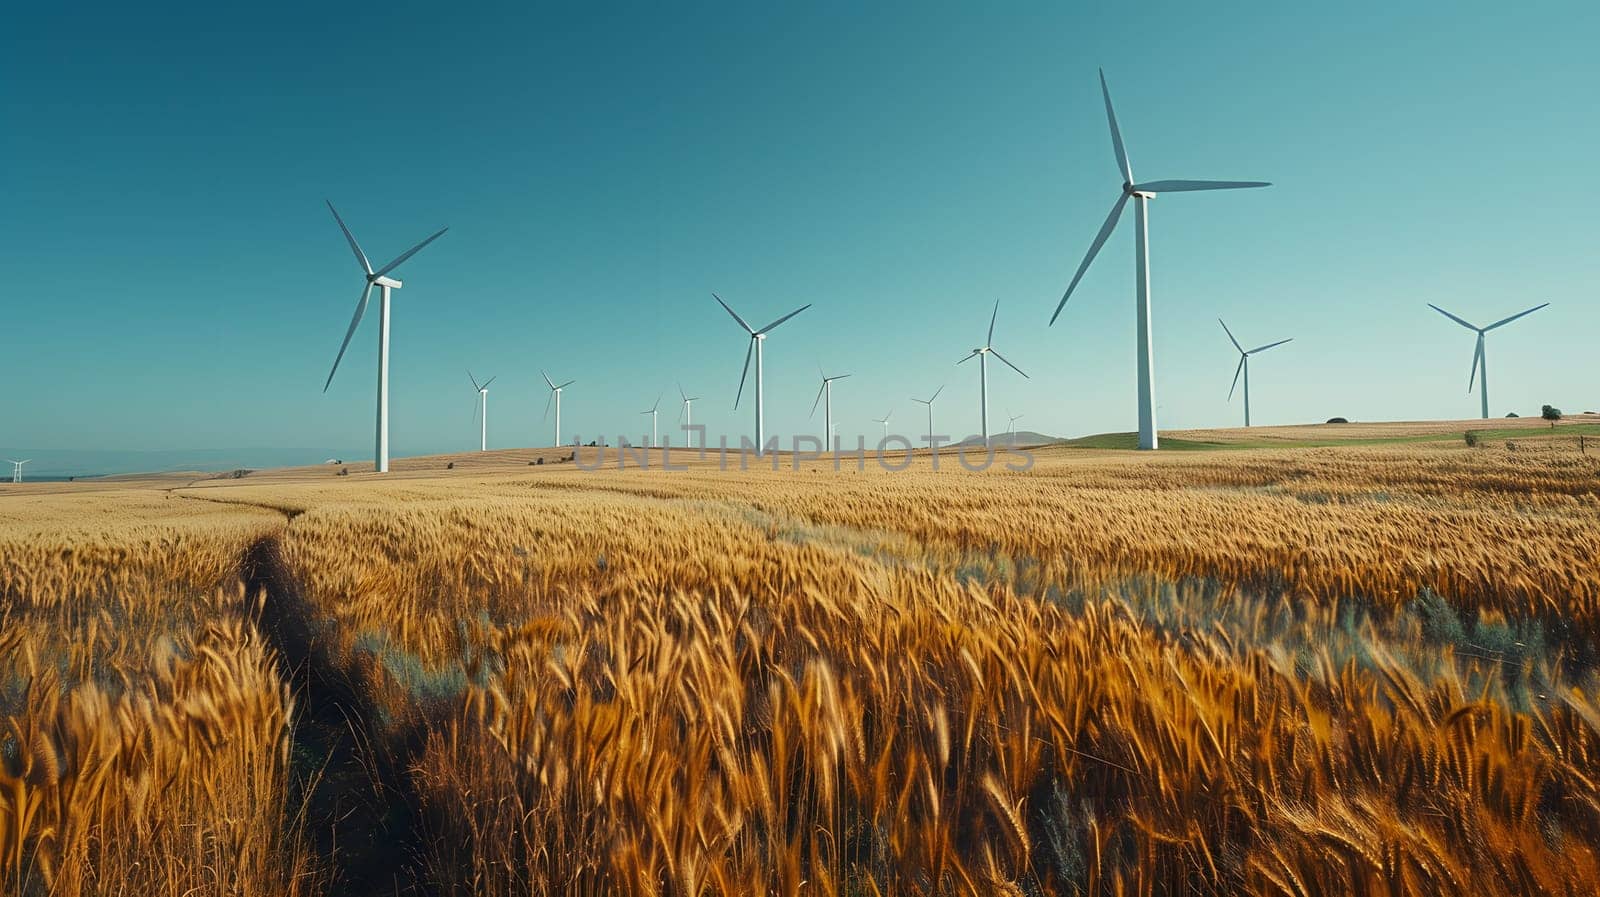 A picturesque natural landscape of a field of wheat with wind turbines in the background, creating a harmonious blend of ecoregion and renewable energy